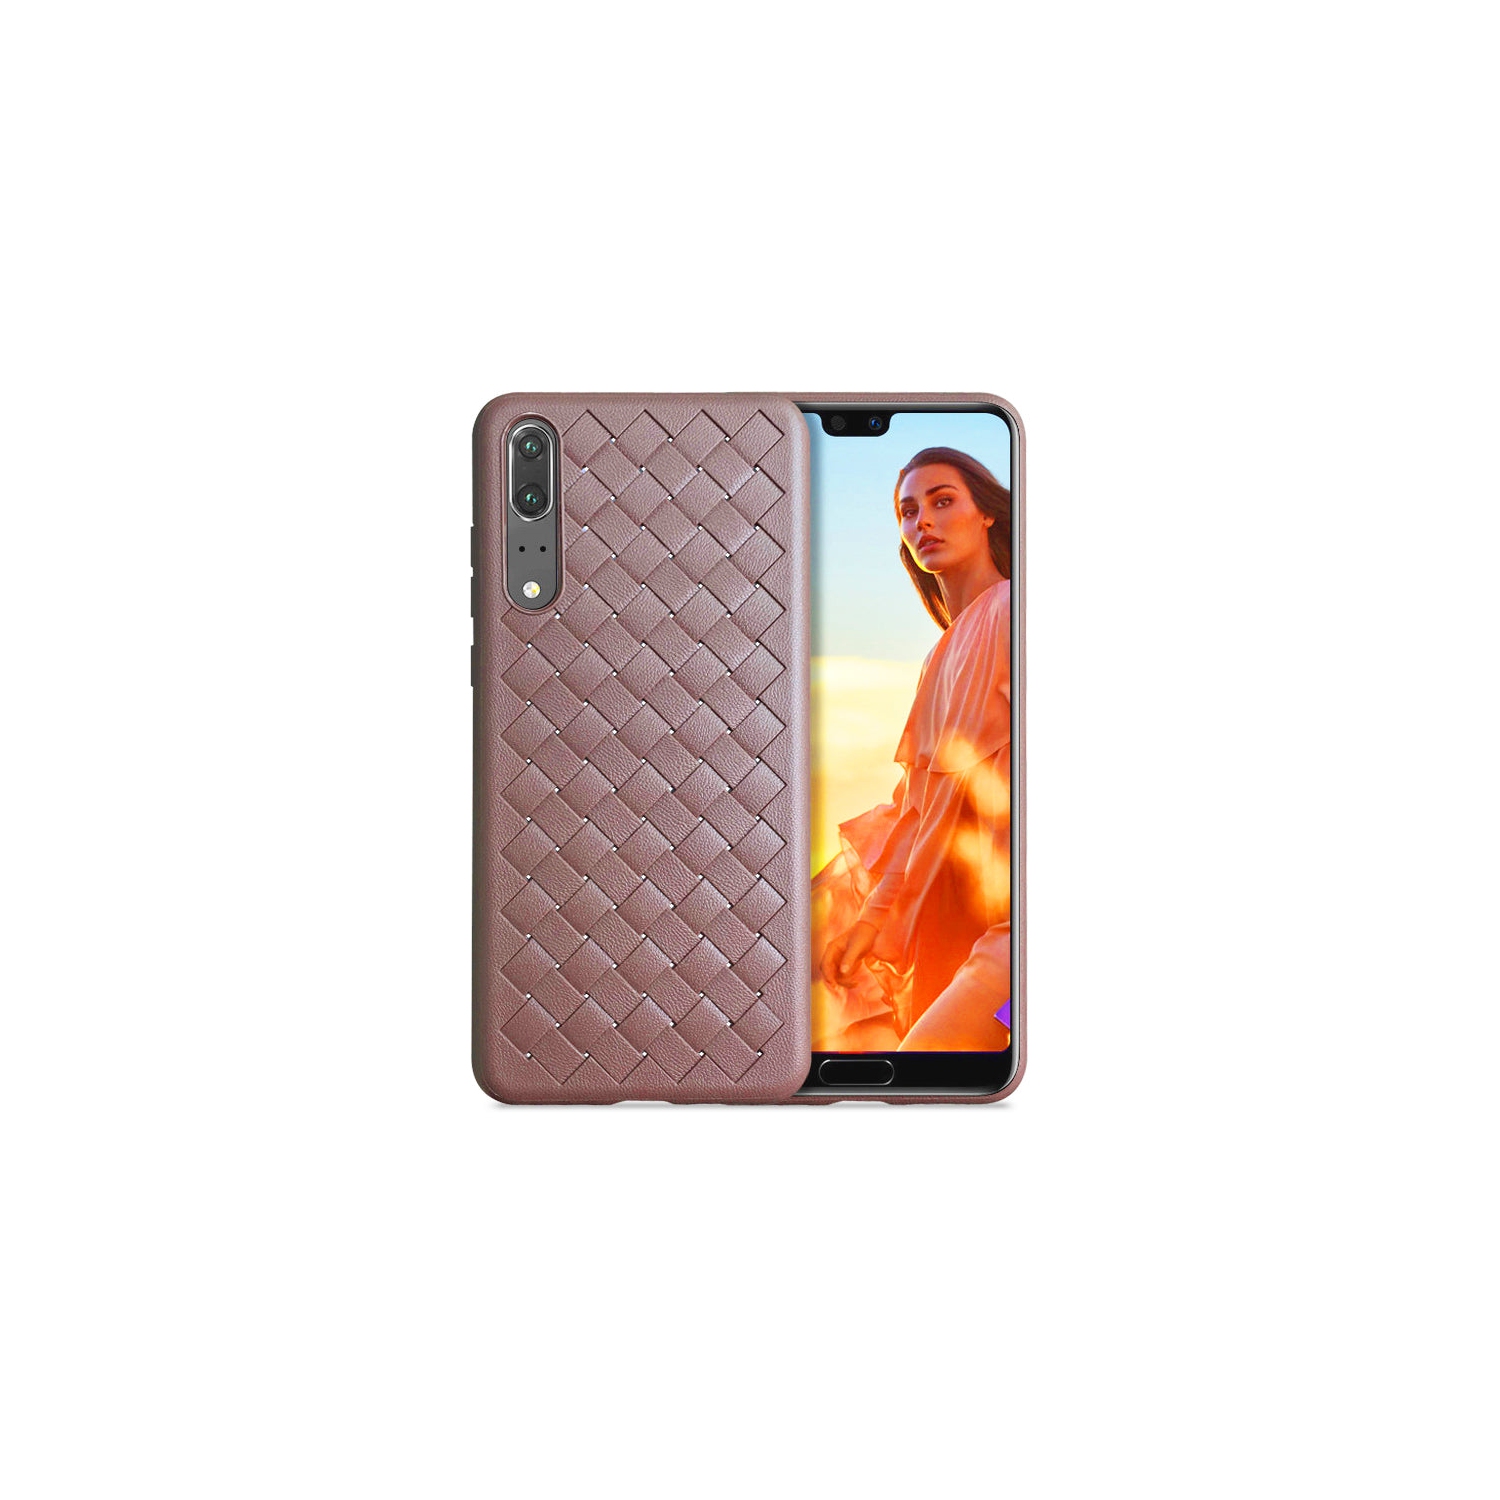 PANDACO Brown Leather Cross-Weave Case for Huawei P20